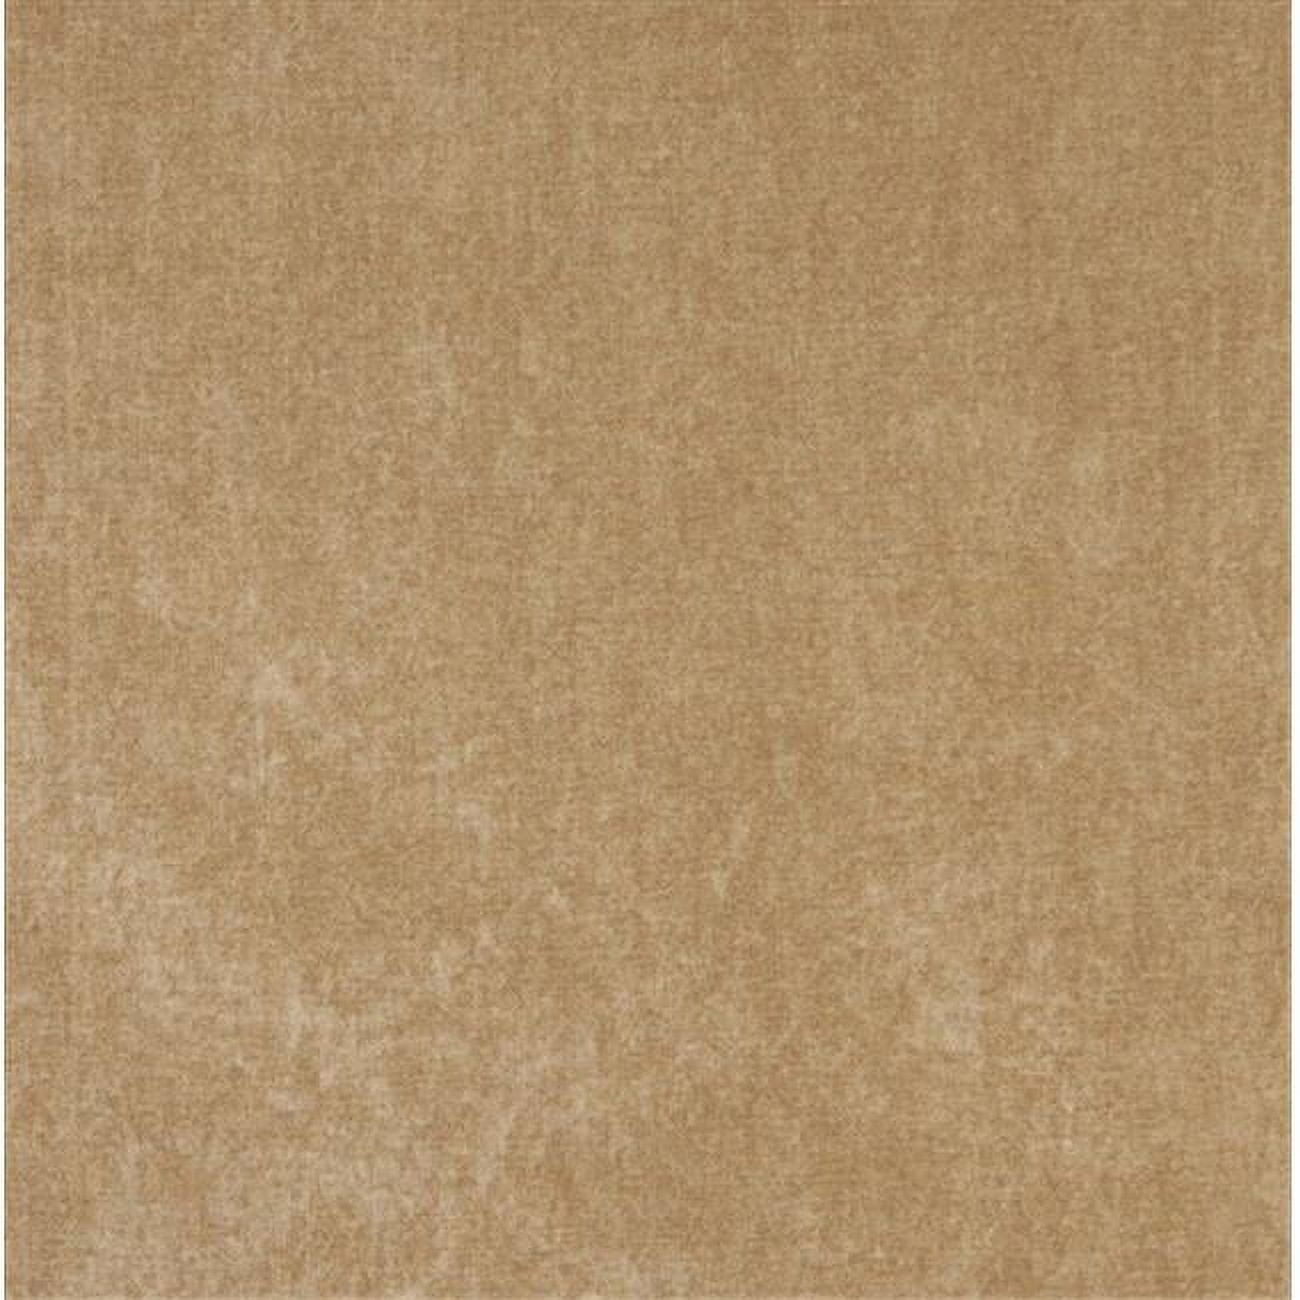 E156 Light Brown Smooth Polyester Velvet Upholstery Fabric by The Yard